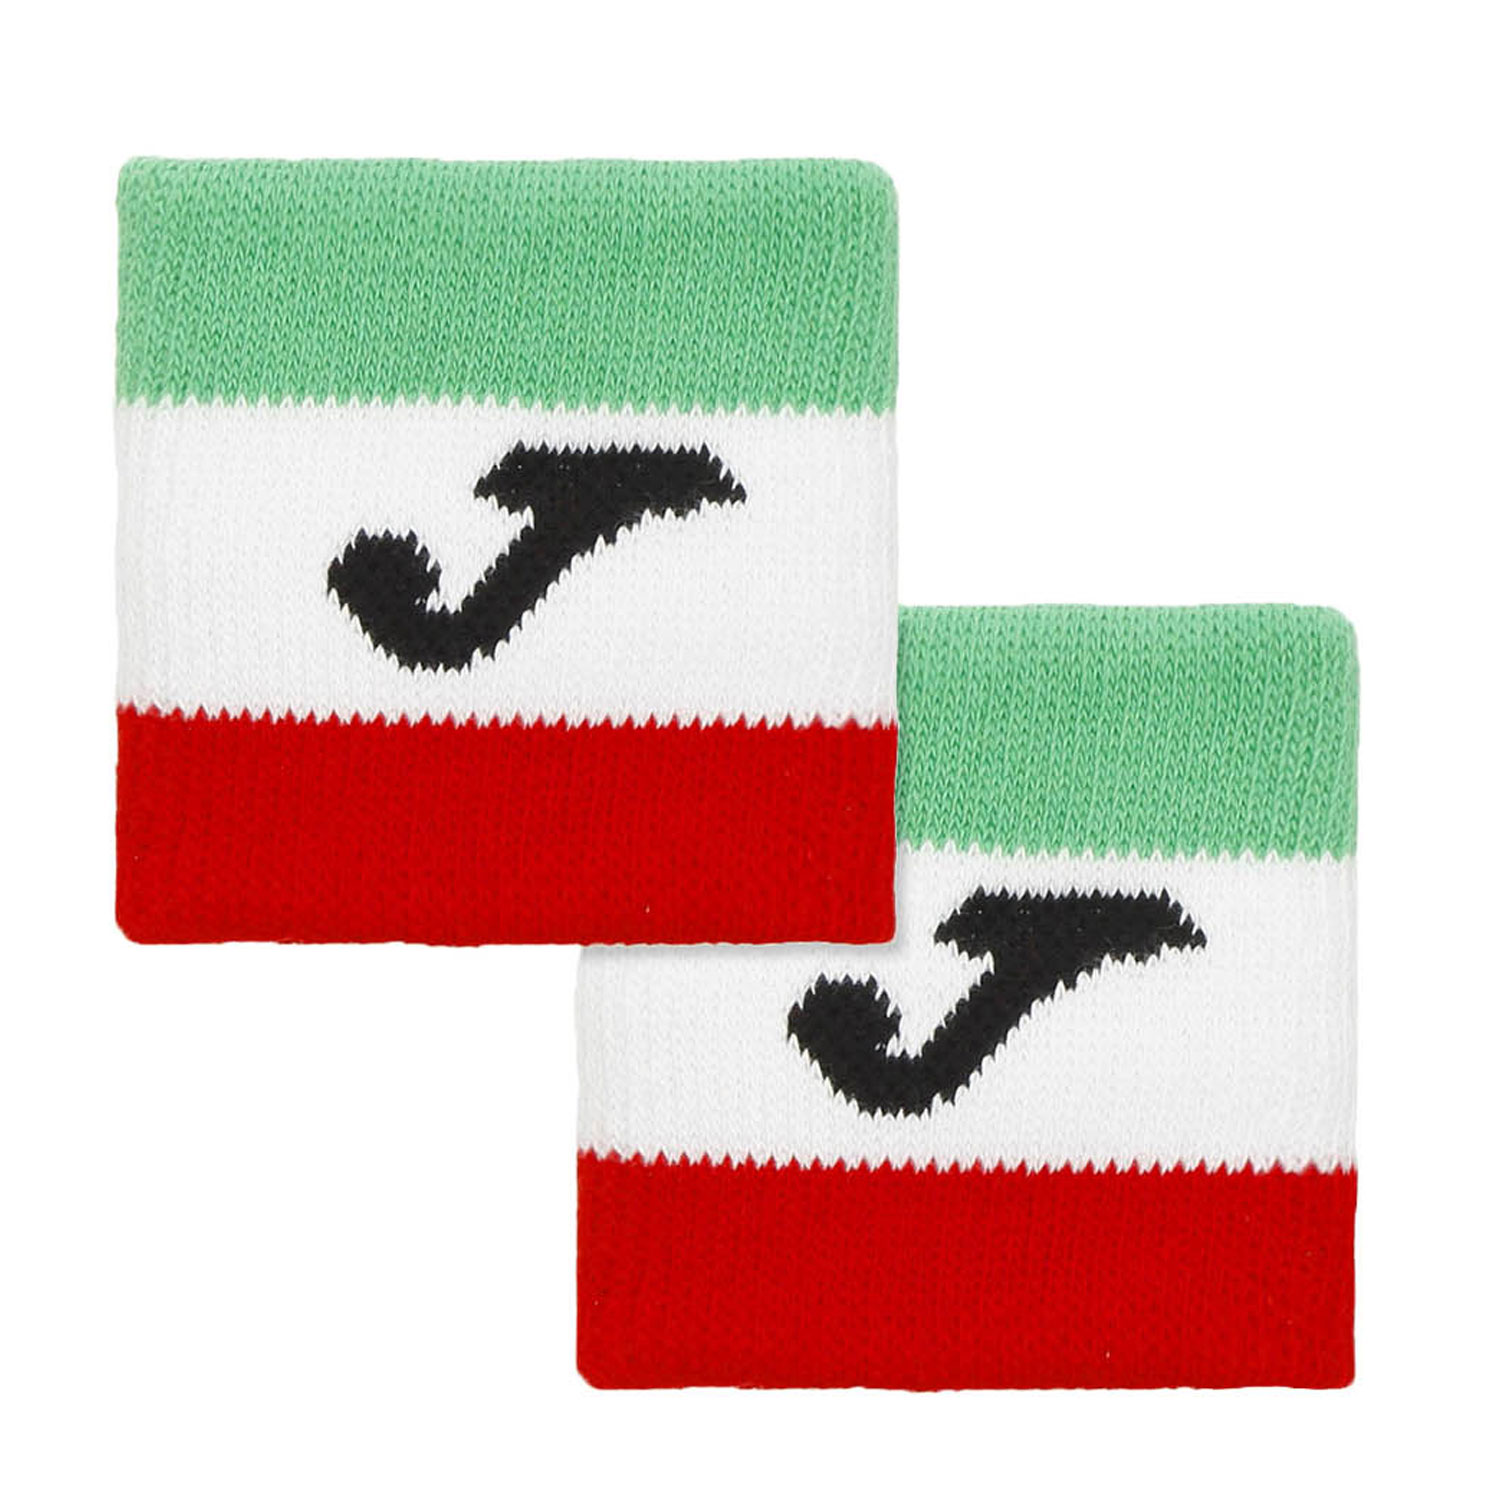 Joma FIT Small Wristbands - Green/White/Red